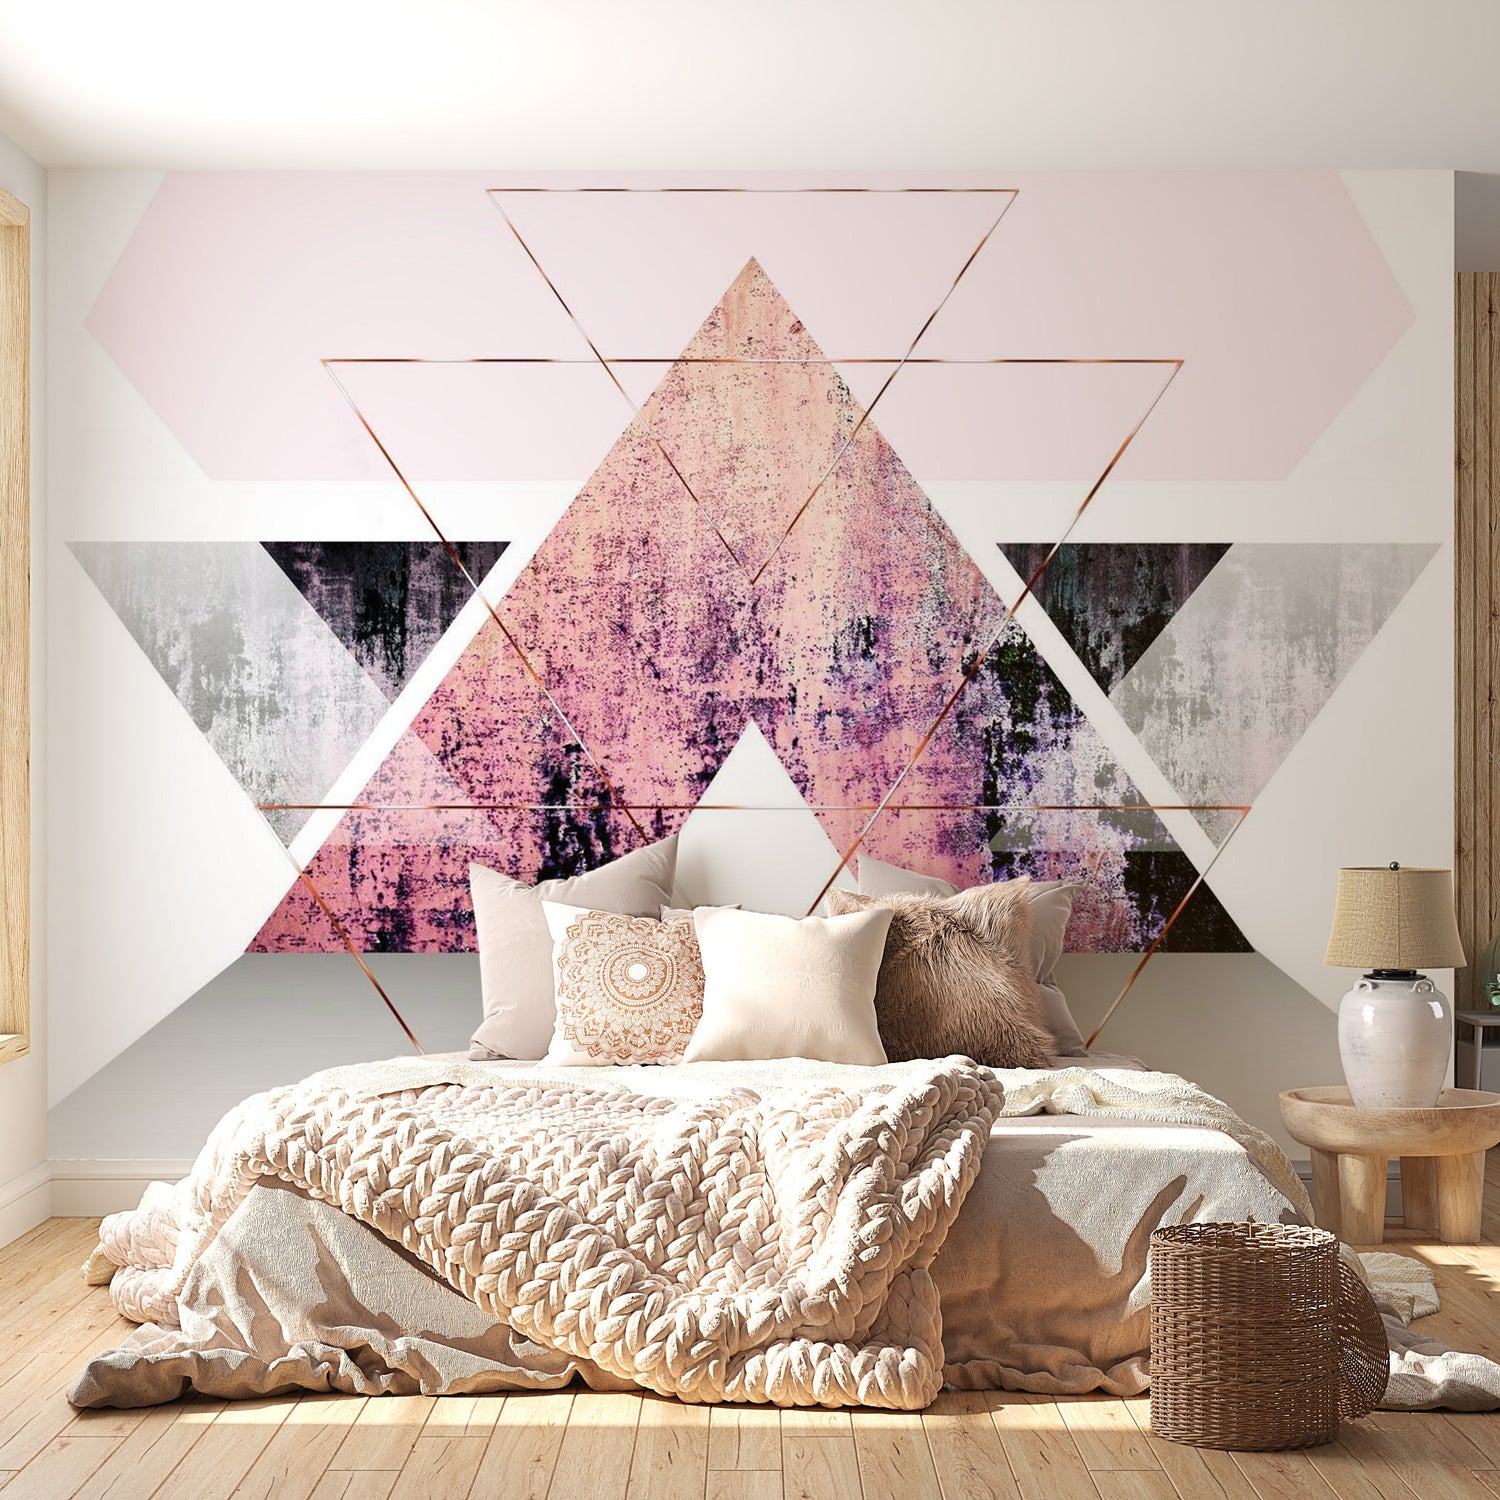 Peel & Stick Wall Mural - Abstract Geometric Concrete Art - Removable Wall Decals